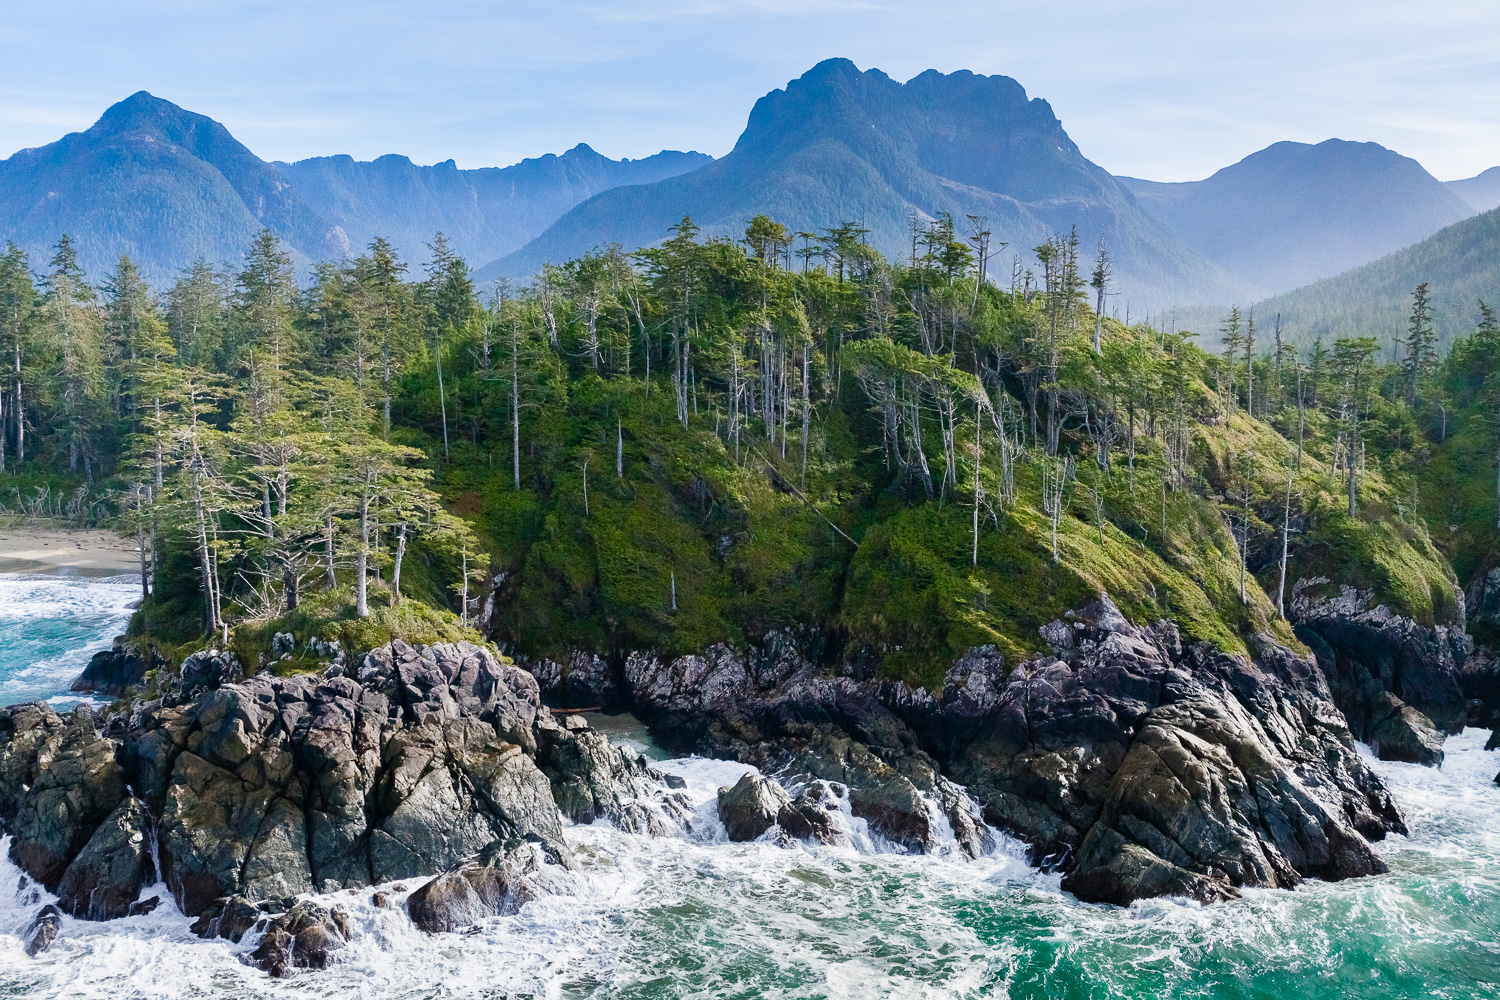 A turquoise ocean splashes against craggy rocks with lush, green old-growth forest and blue-hued mountains in the background.